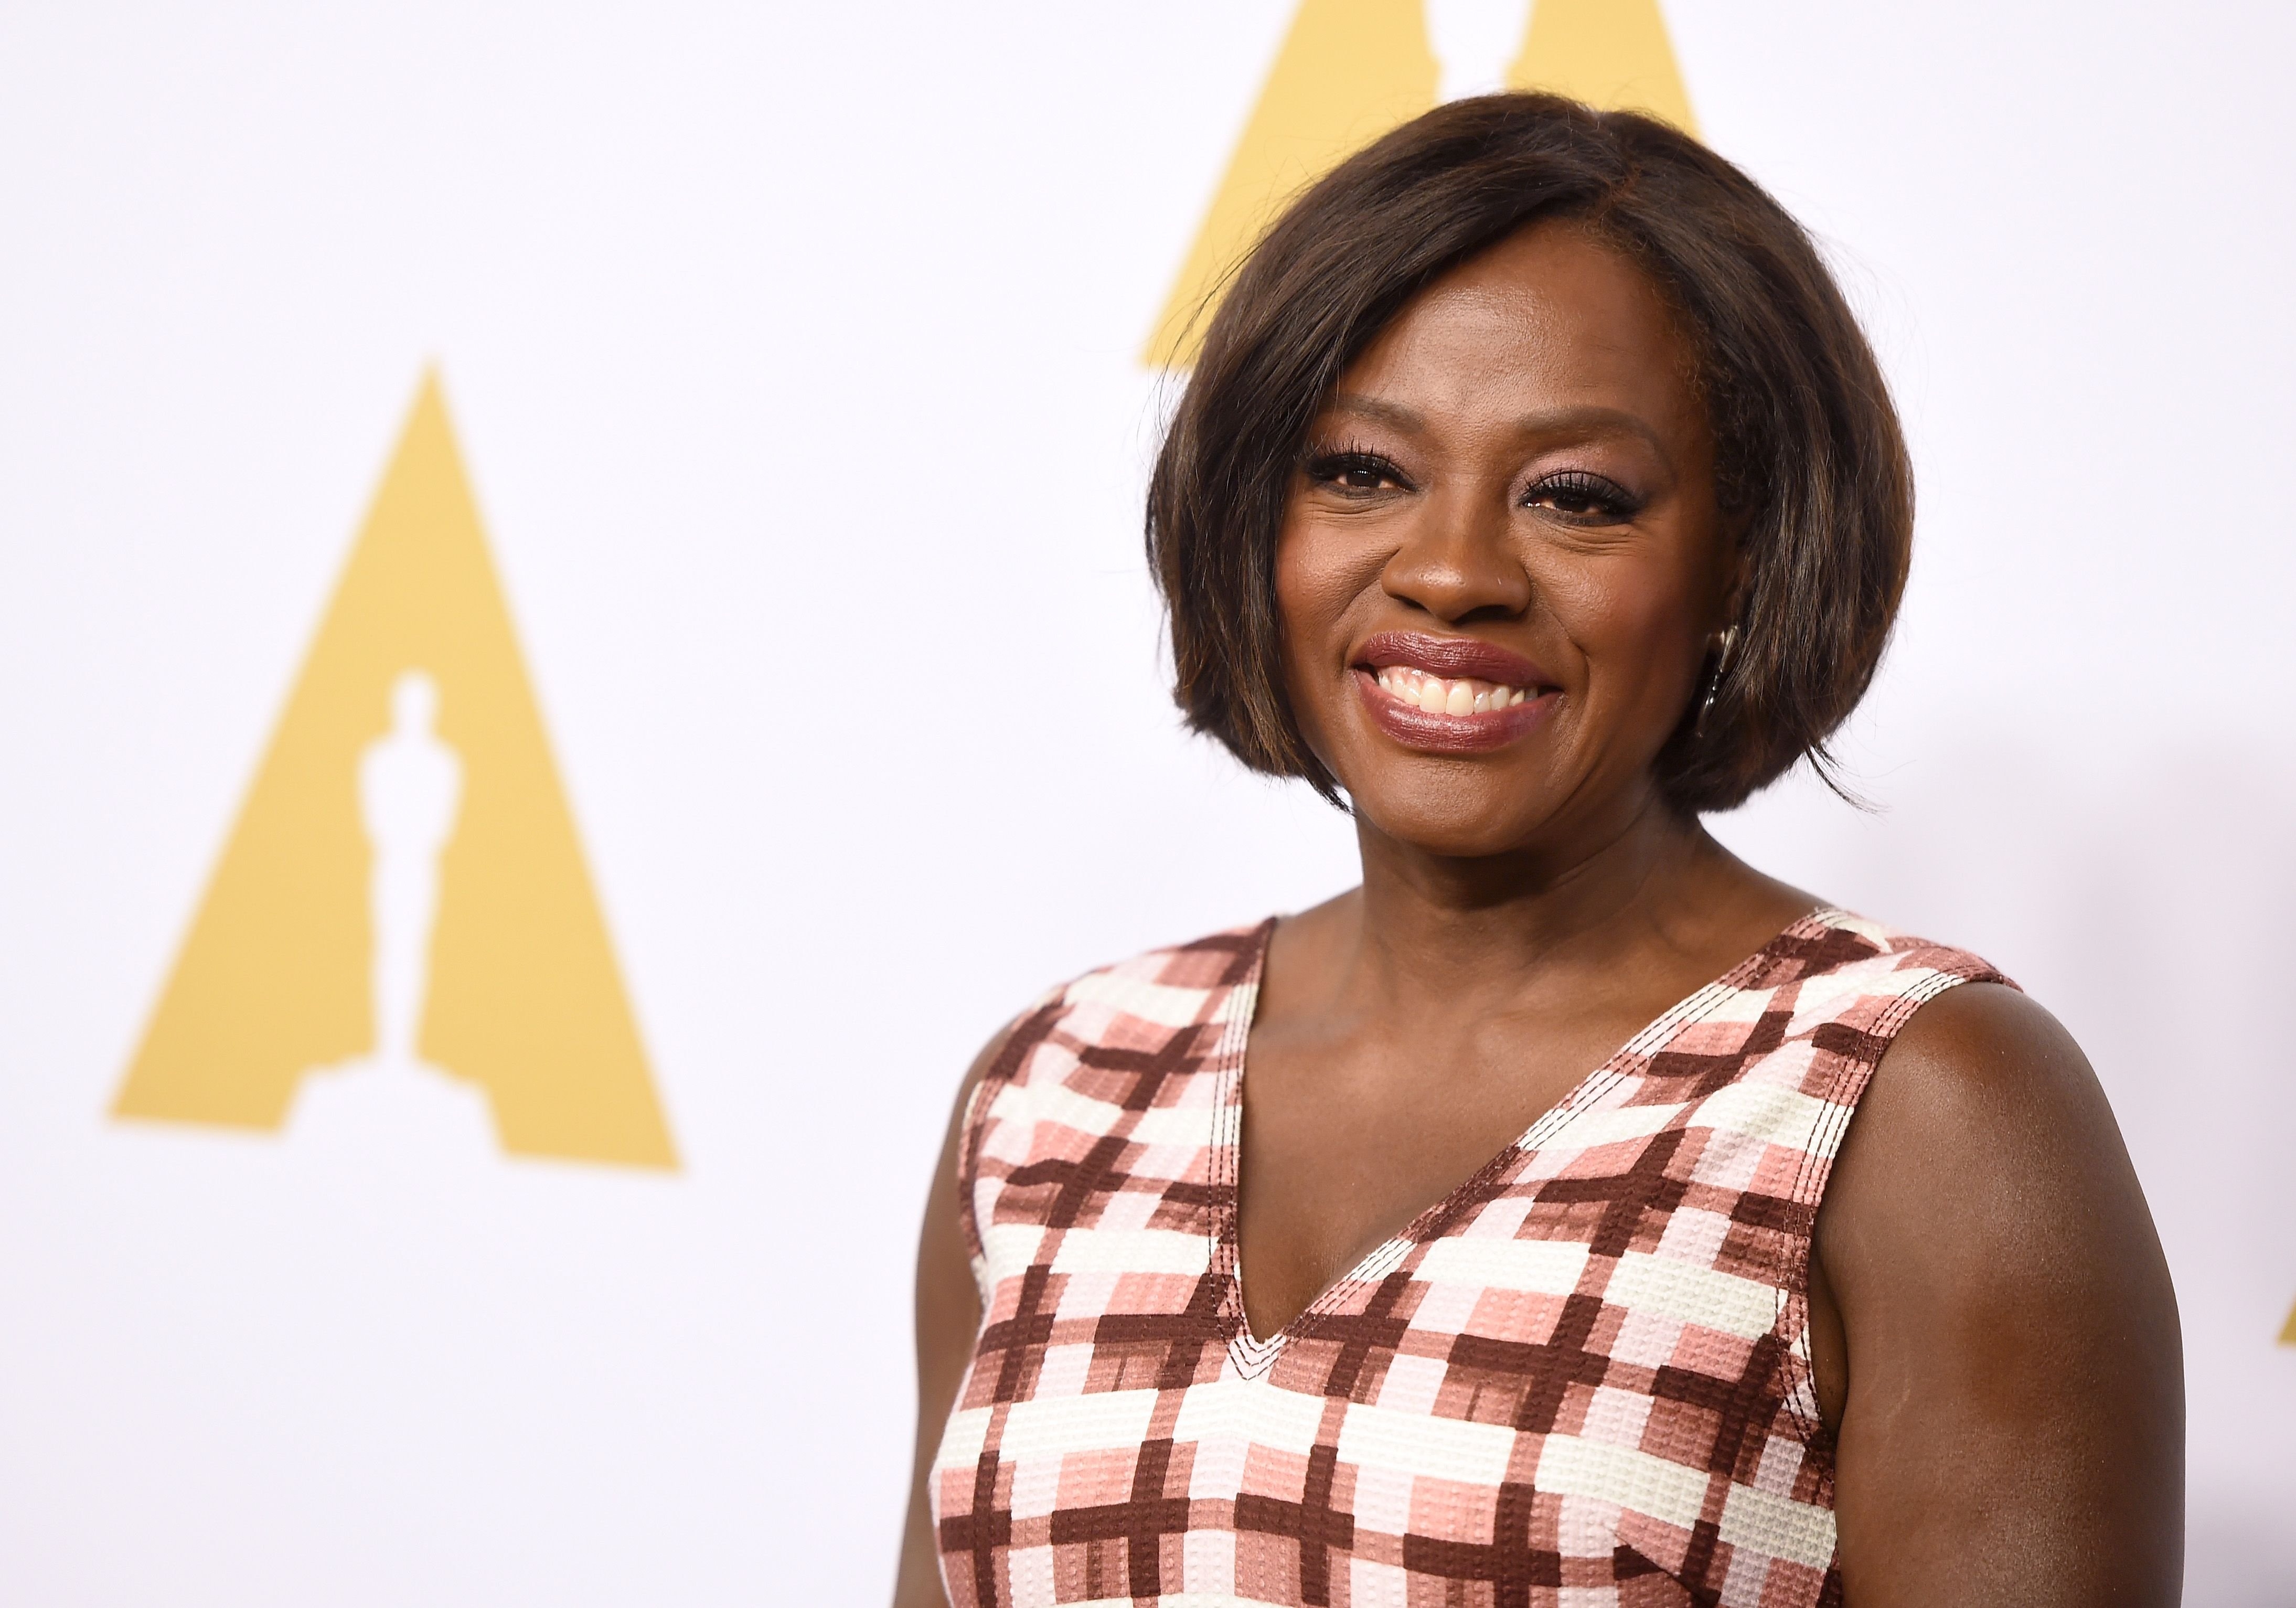 Actress Viola Davis attending the 89th Annual Academy Awards Nominee Luncheon on February 6, 2017 in Beverly Hills. | Photo: Getty Images